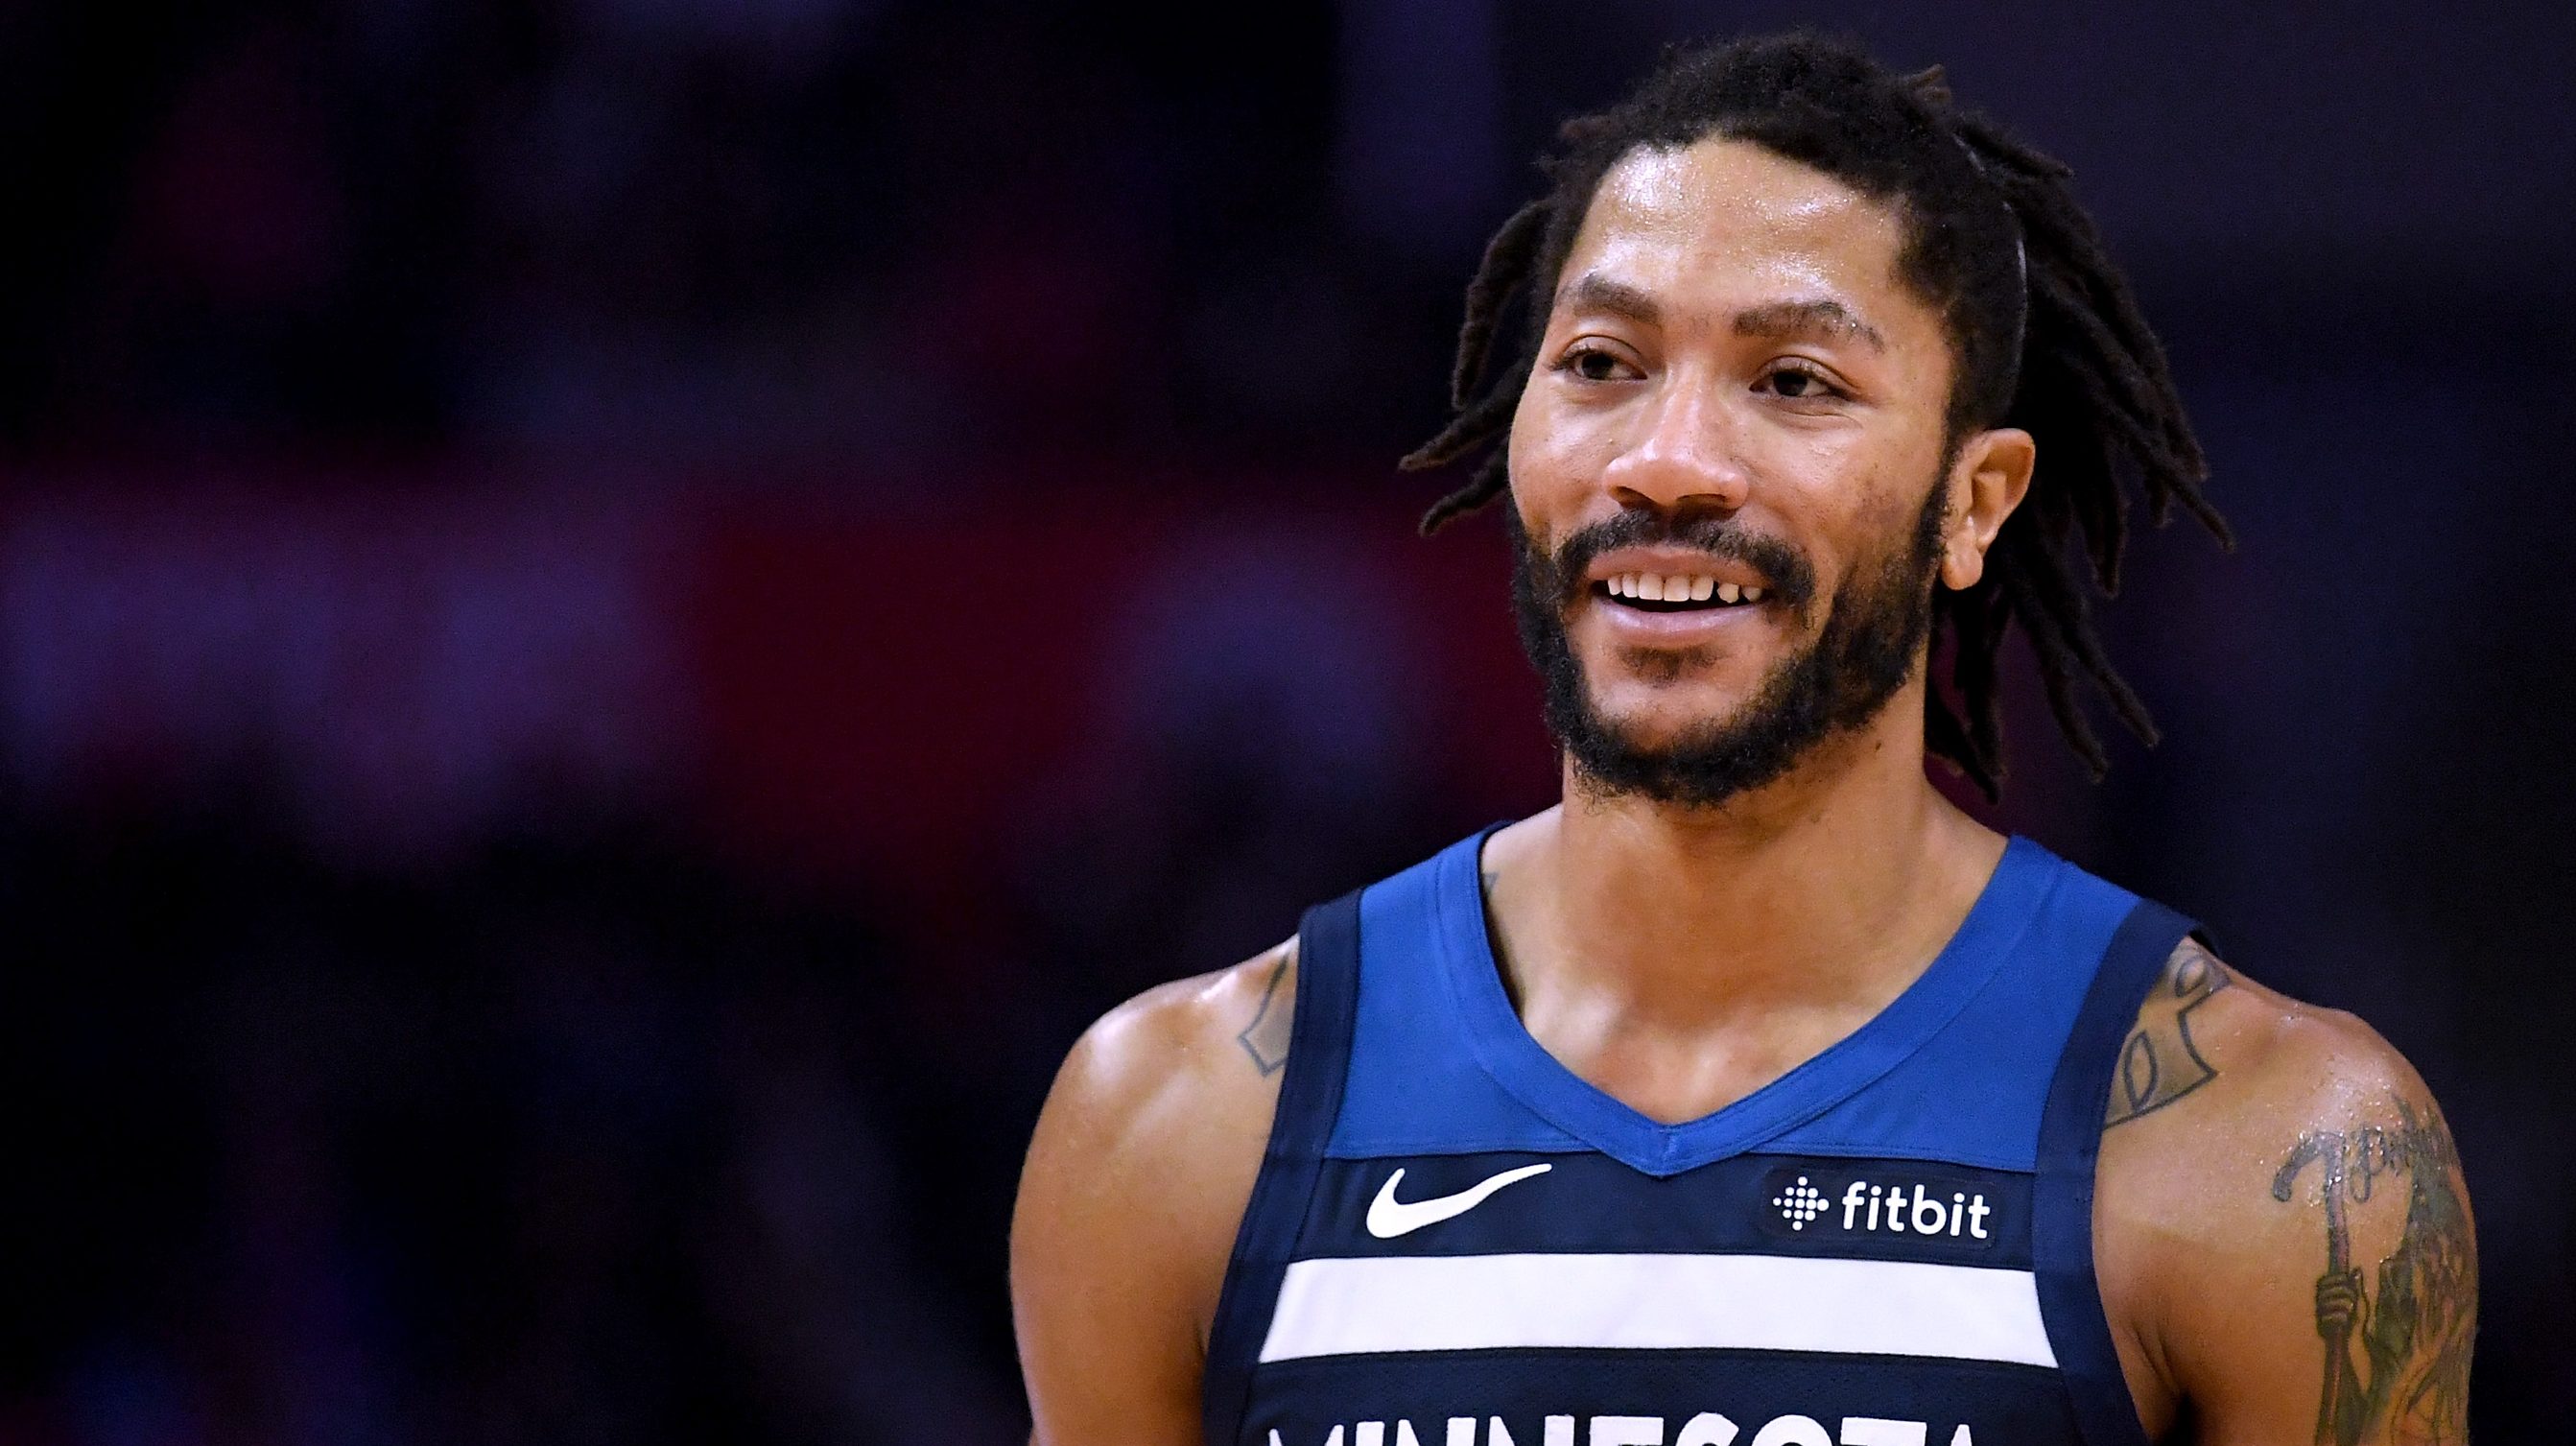 Derrick Rose Trade Talk: He Could be Attractive at the Deadline | Heavy.com